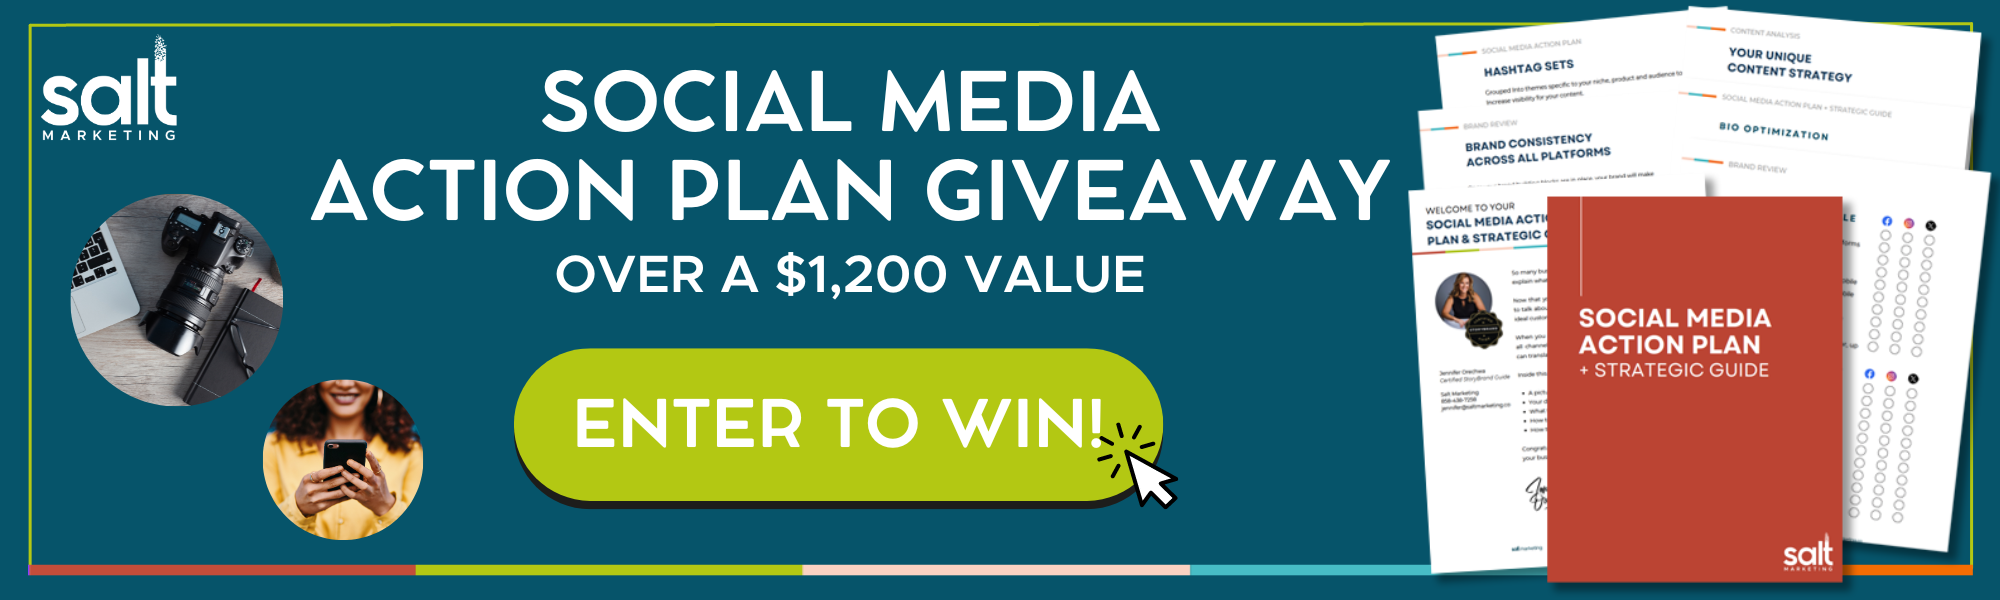 Social media Action Plan Giveaway Banner Ad Graphic